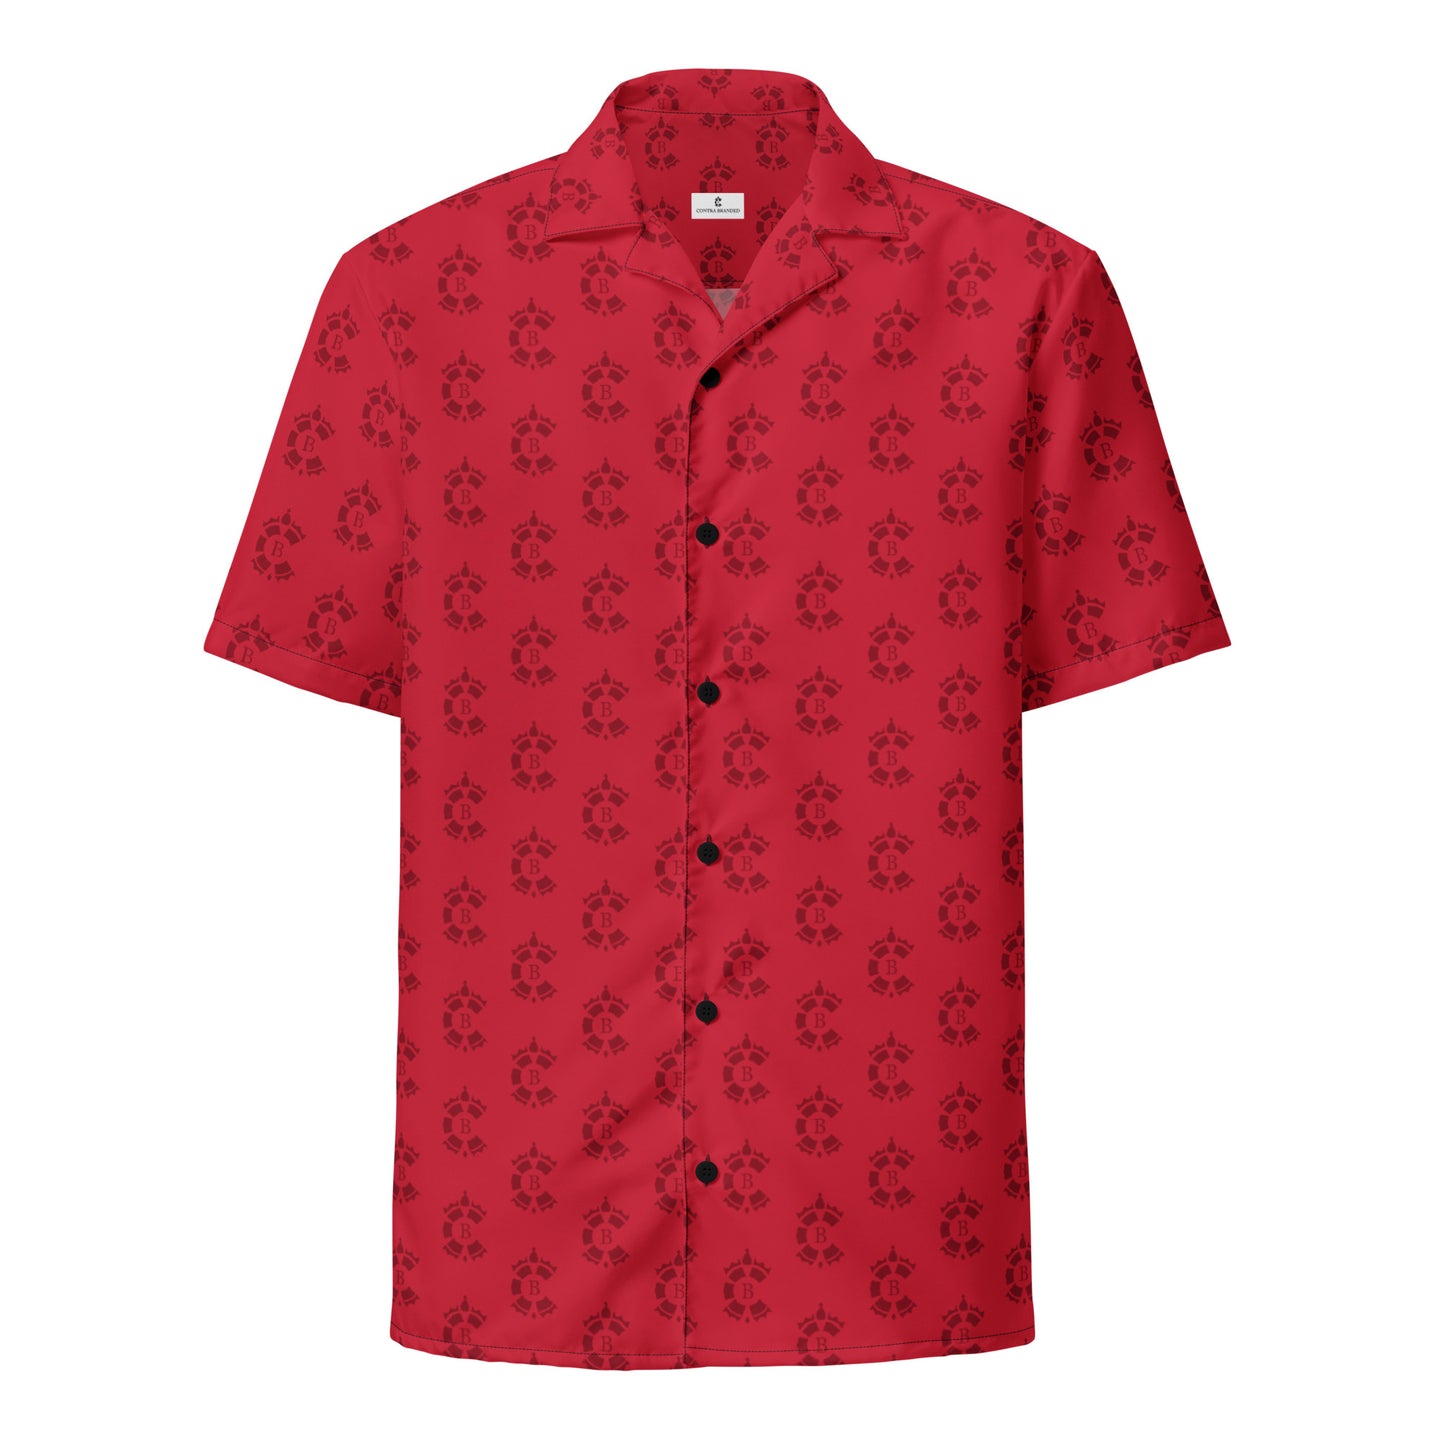 CONTRABRANDED R-Logos Button Up Short Sleeve Red on Red